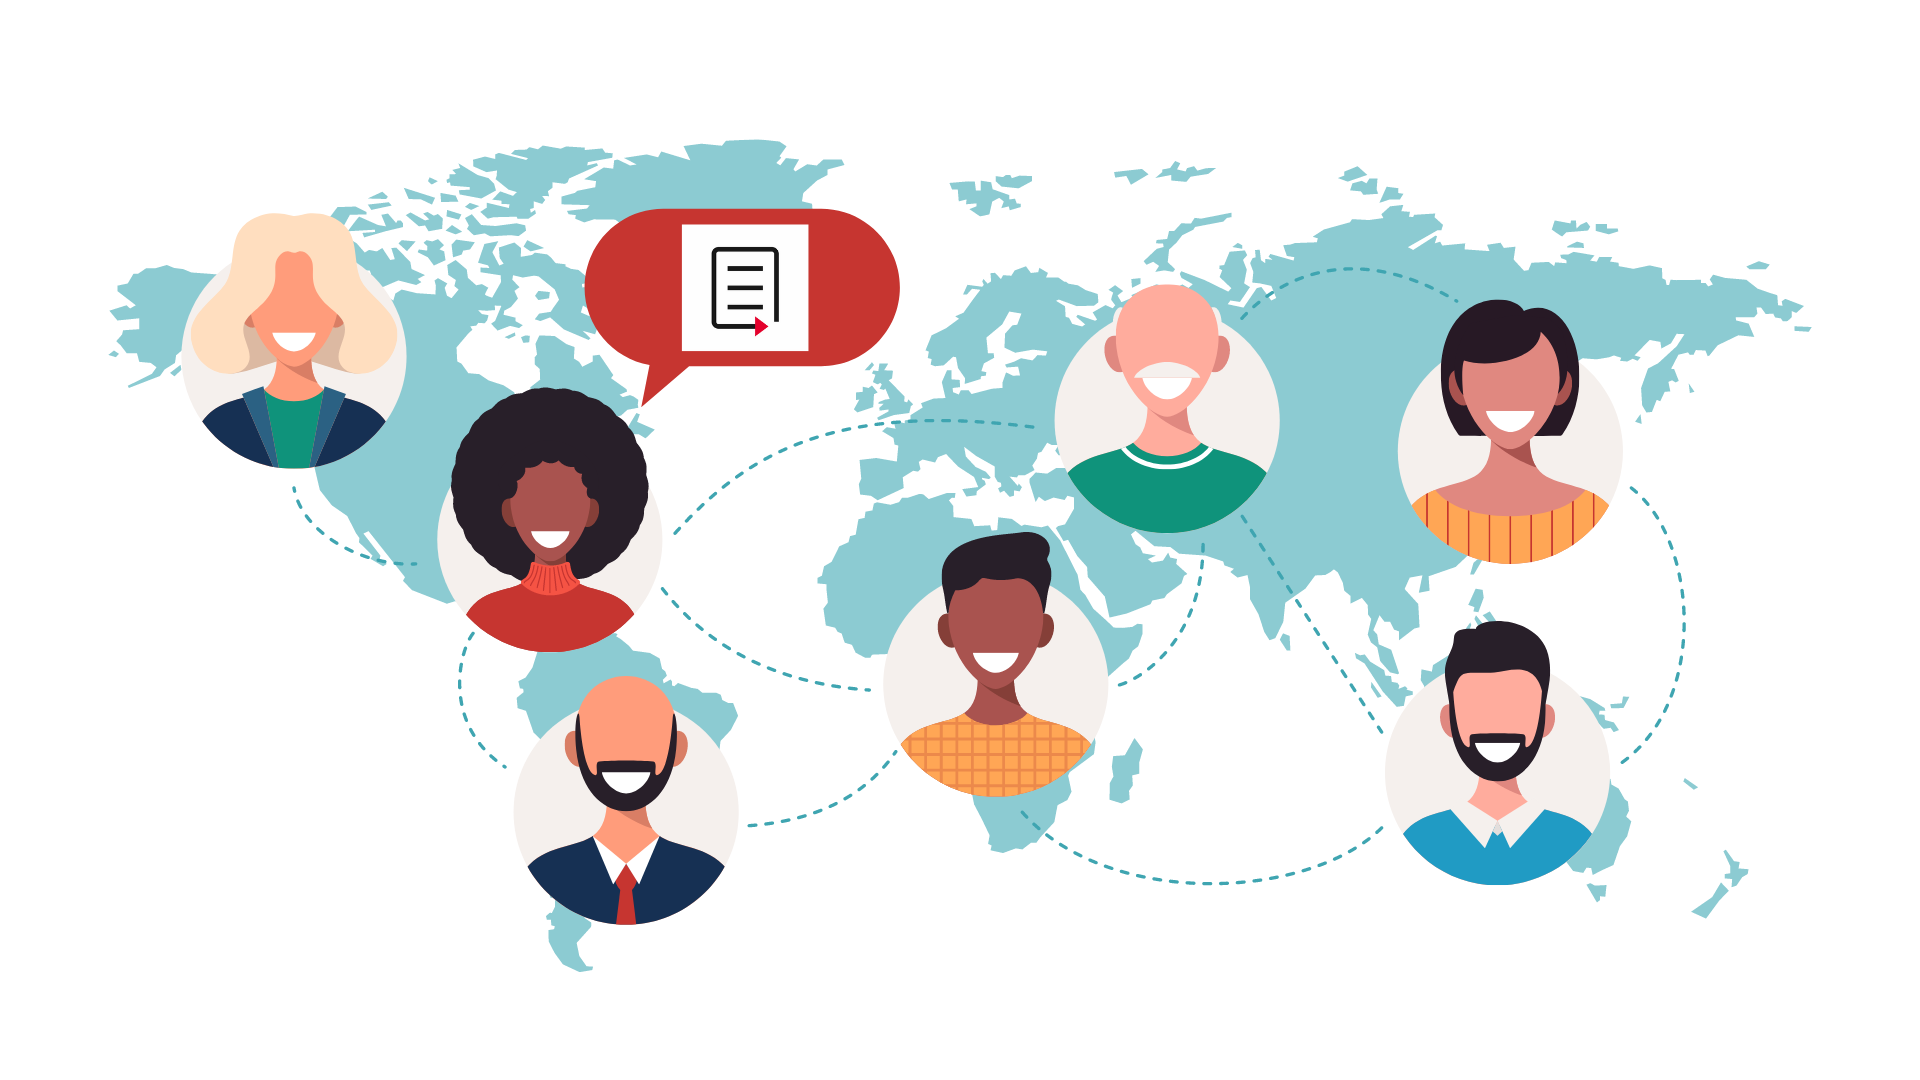 Image depicting smiling people making connections and talking about PREreview around the world. Illustration by Lunarts Studio via Canva.com